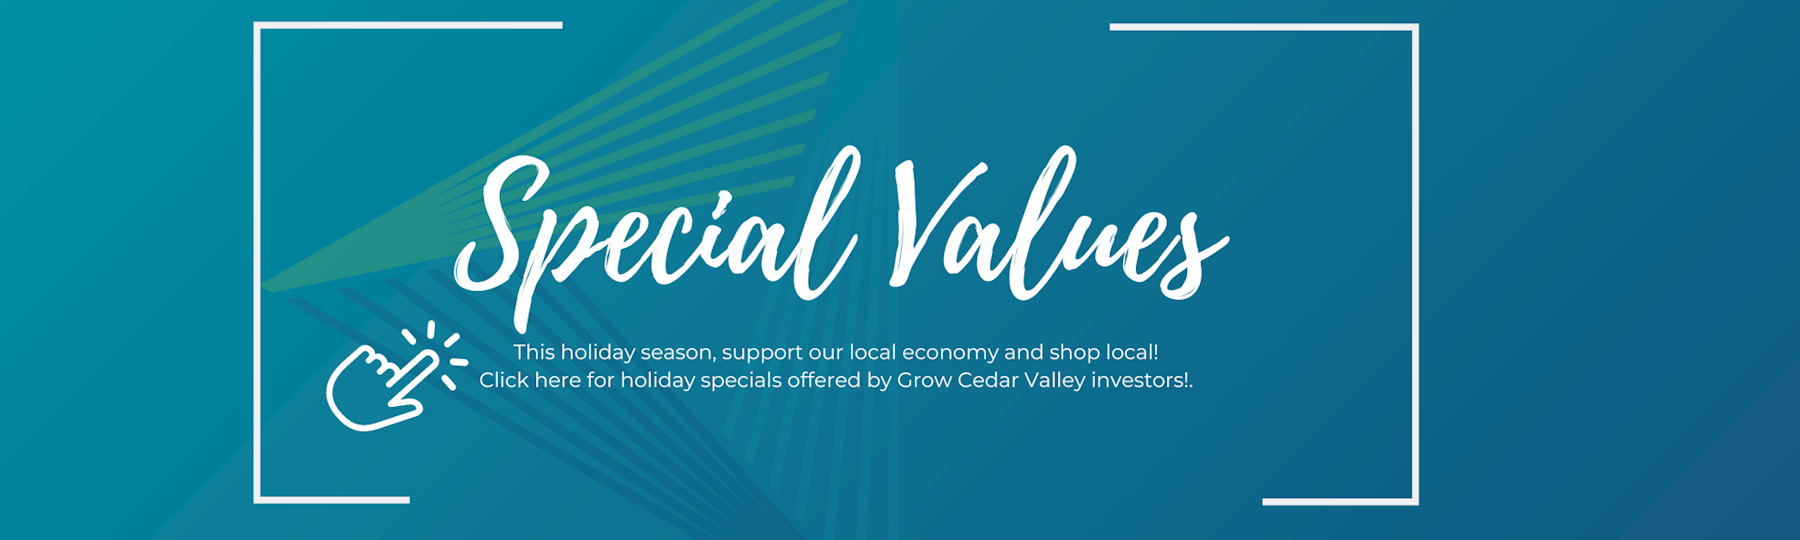 Click here for Special Values in the Valley!